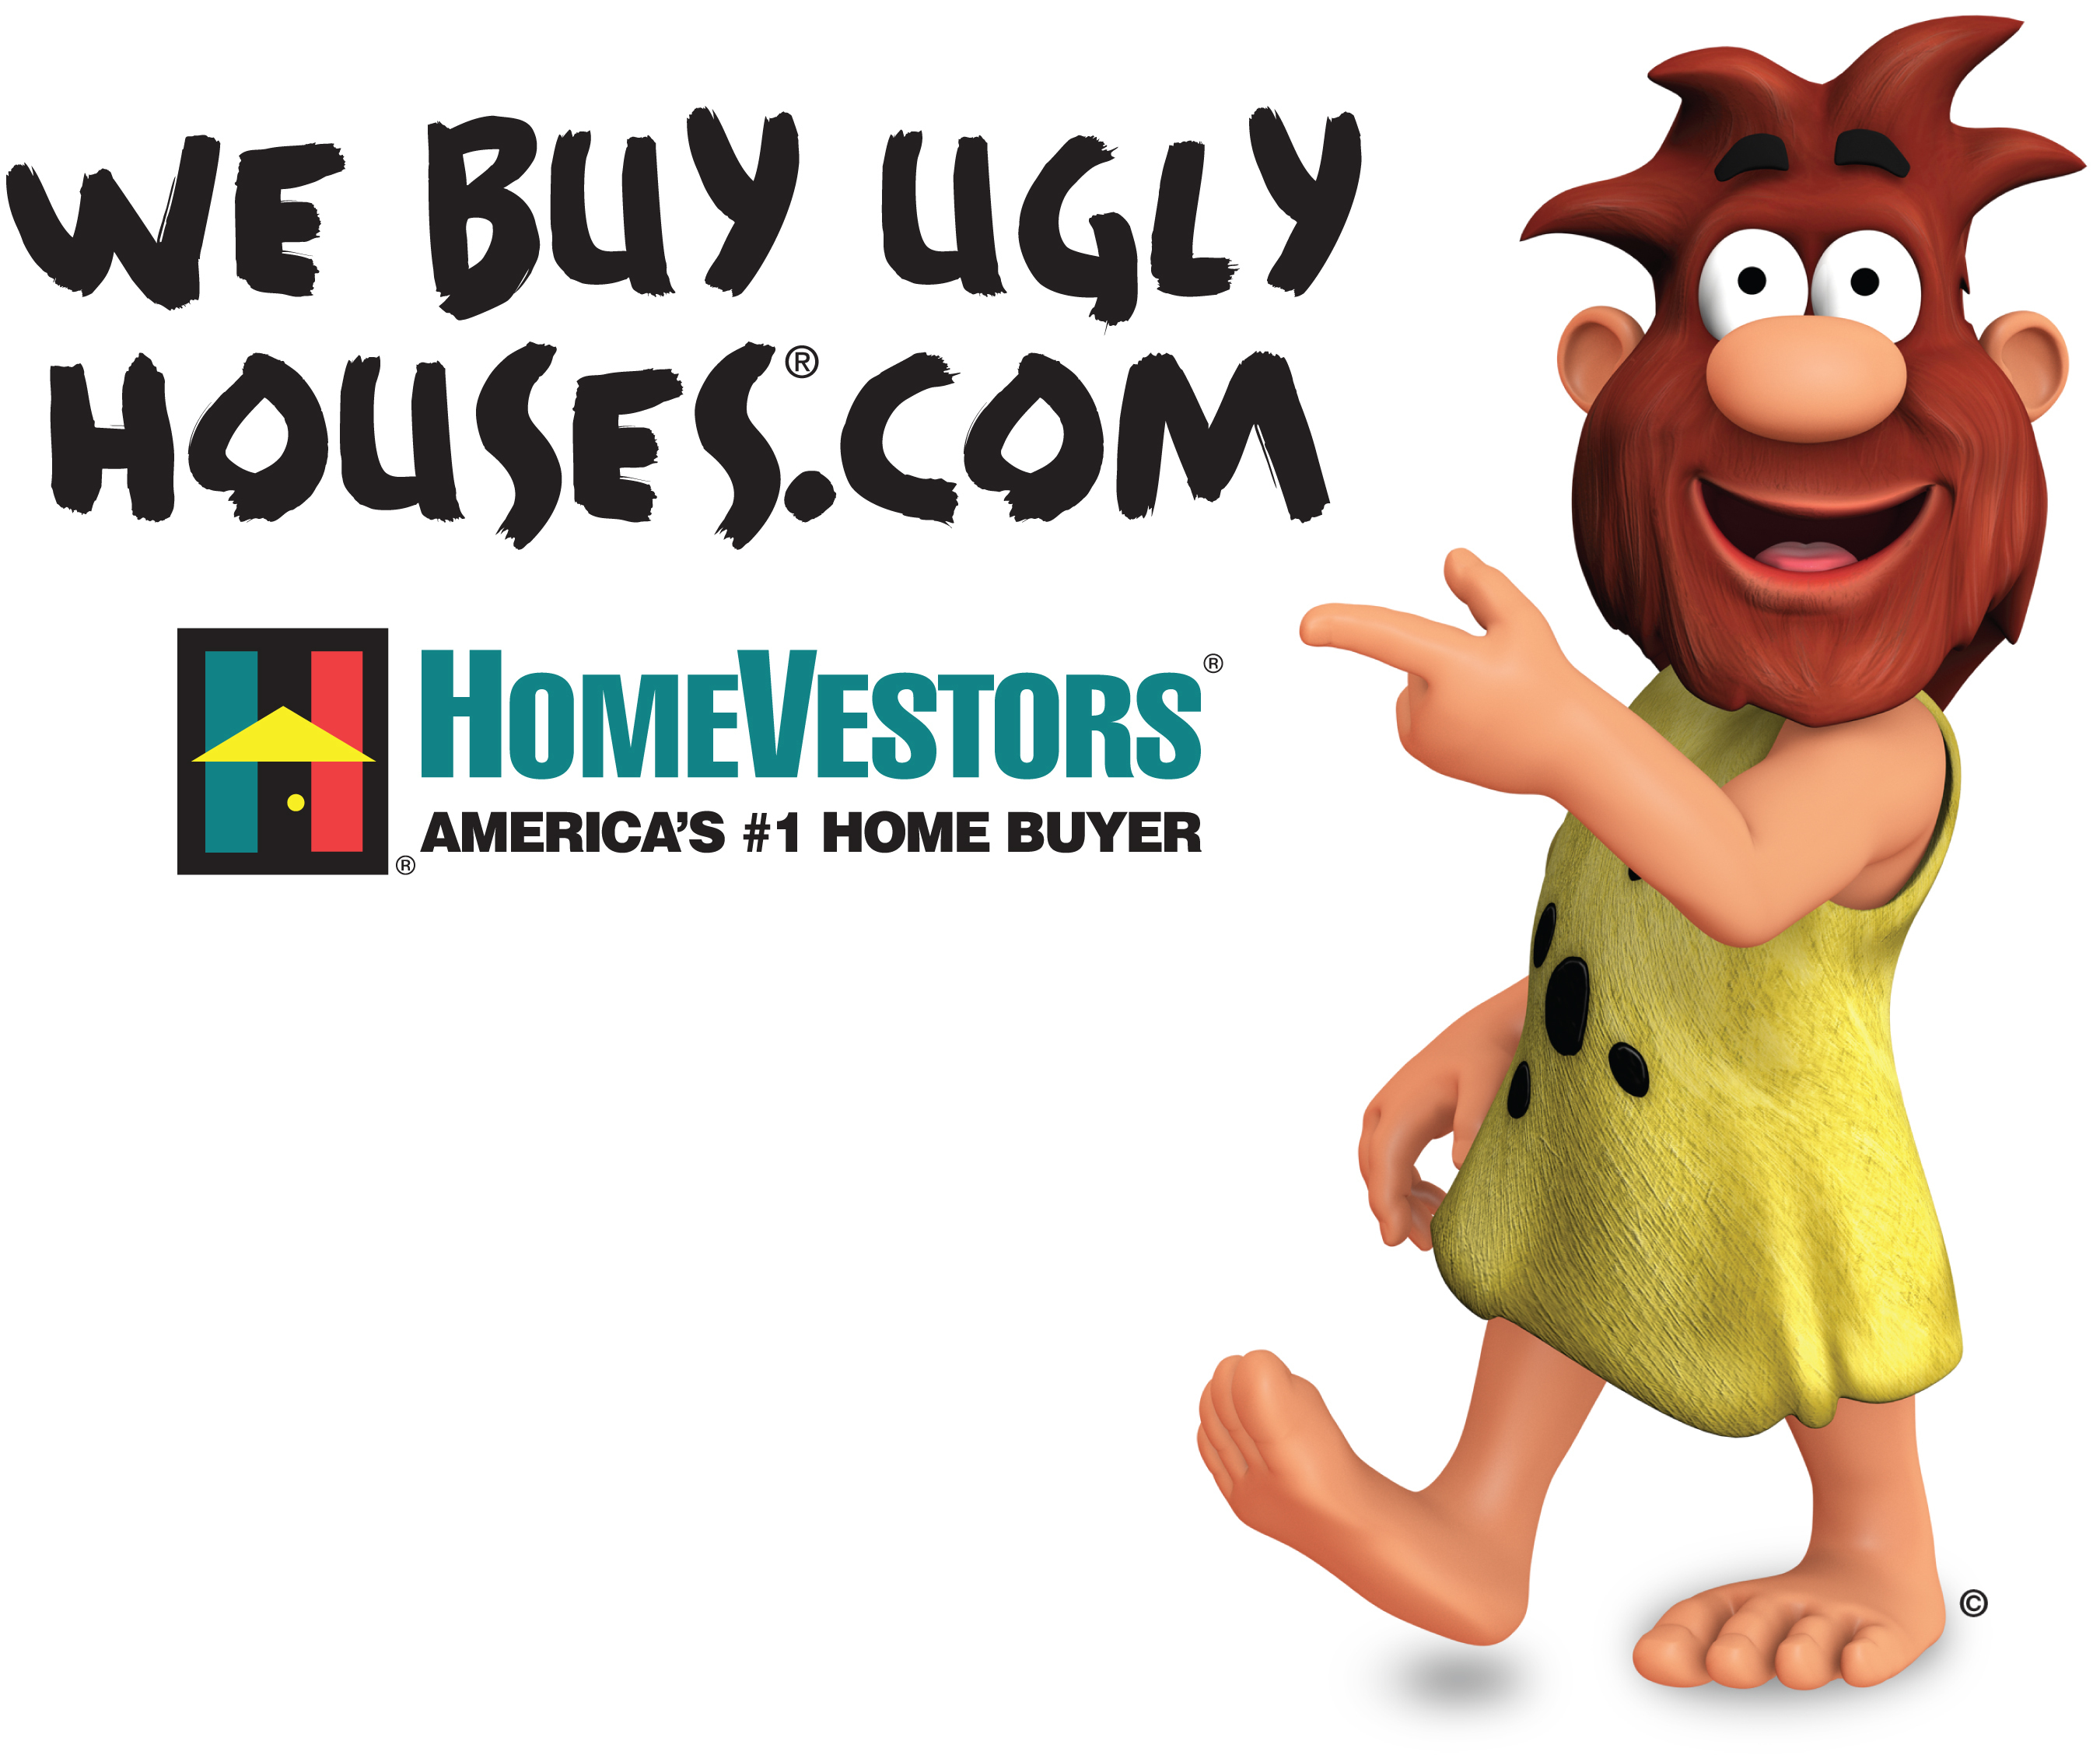 HomeVestors of America (the "We Buy Ugly Houses(R)" company), has recruited its 500th franchisee, marking a 25 percent increase in franchisees just since the end of 2013.